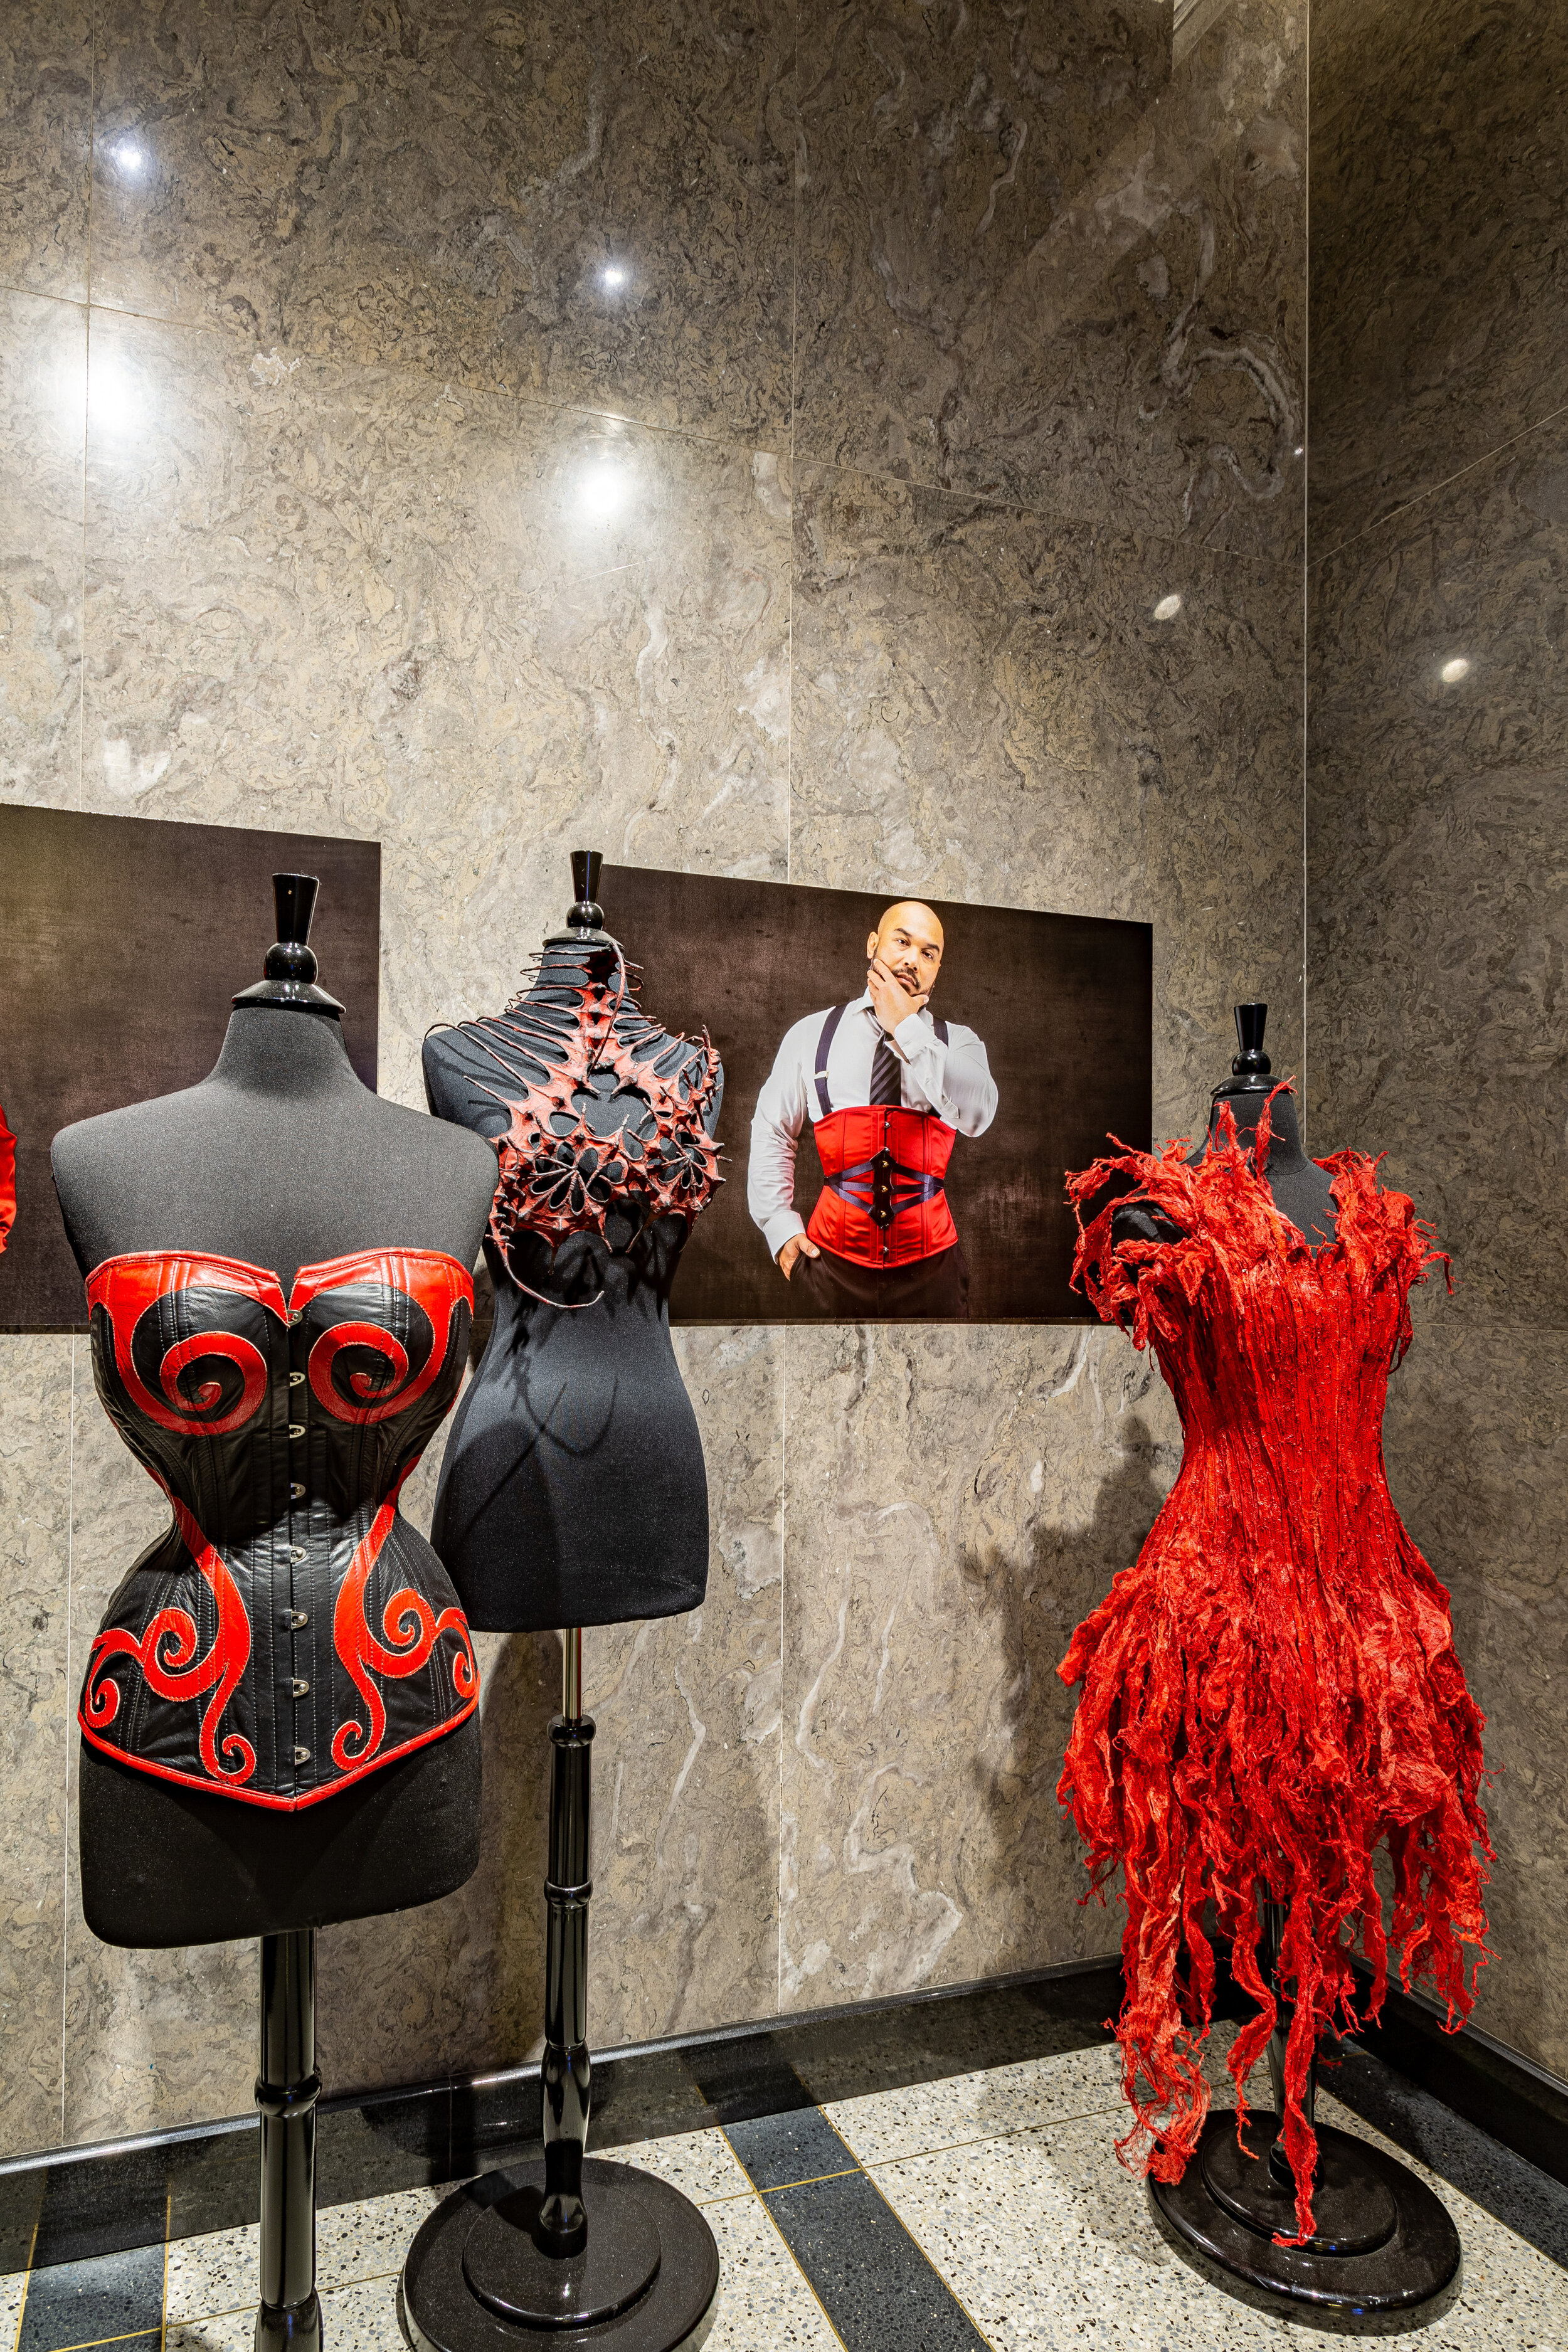  In the elevator alcove is a red and black leather corset made by   Dark Garden Corsetry   for Cathie Jung and  Nika Danielska ’s  Exoskeleton Bra.  These are displayed along with two male corsets and  Chie Ono ’s  Blood Red .   And    Portraits of R